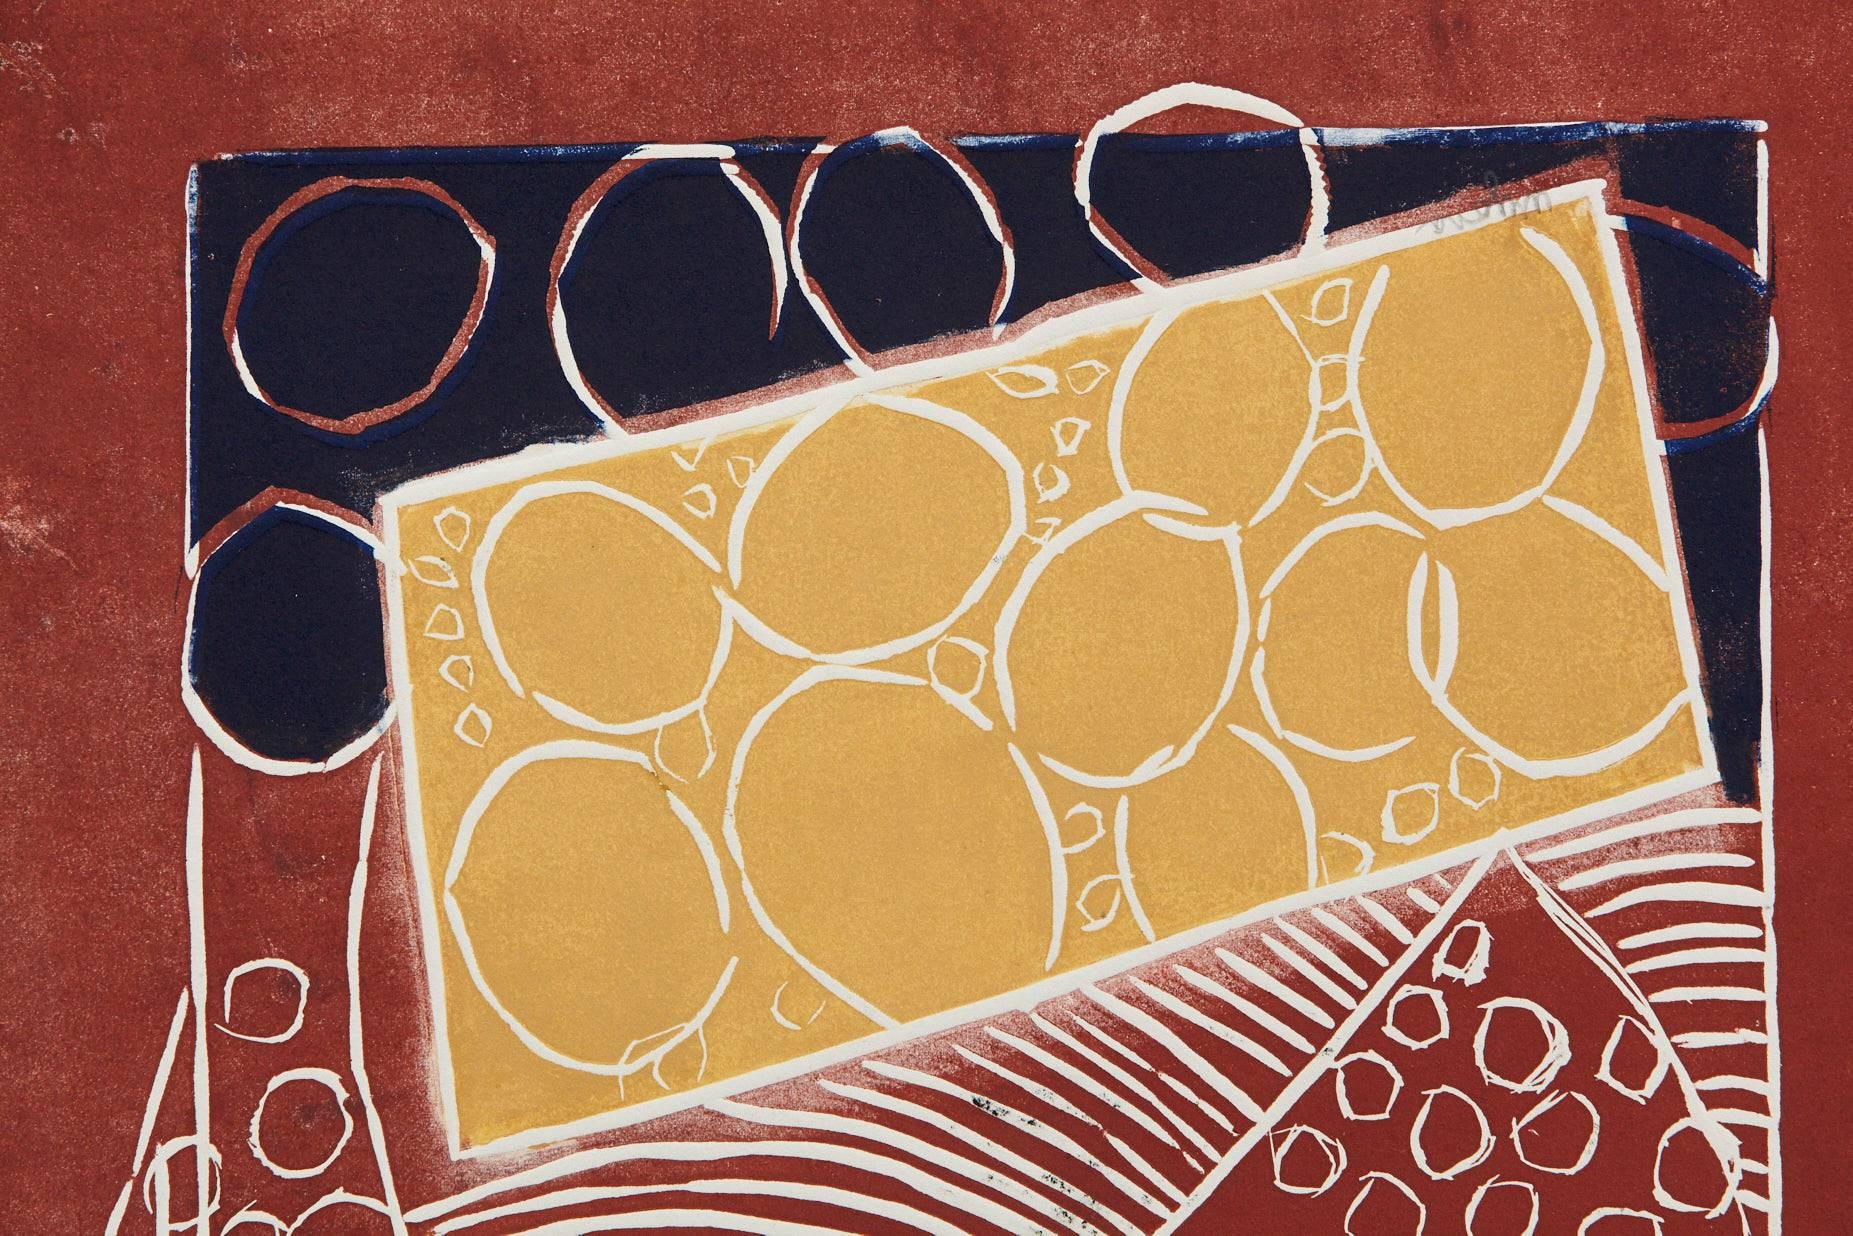 Ocher And Blue Circles On Brick - Abstract Geometric Print by Wyona Diskin